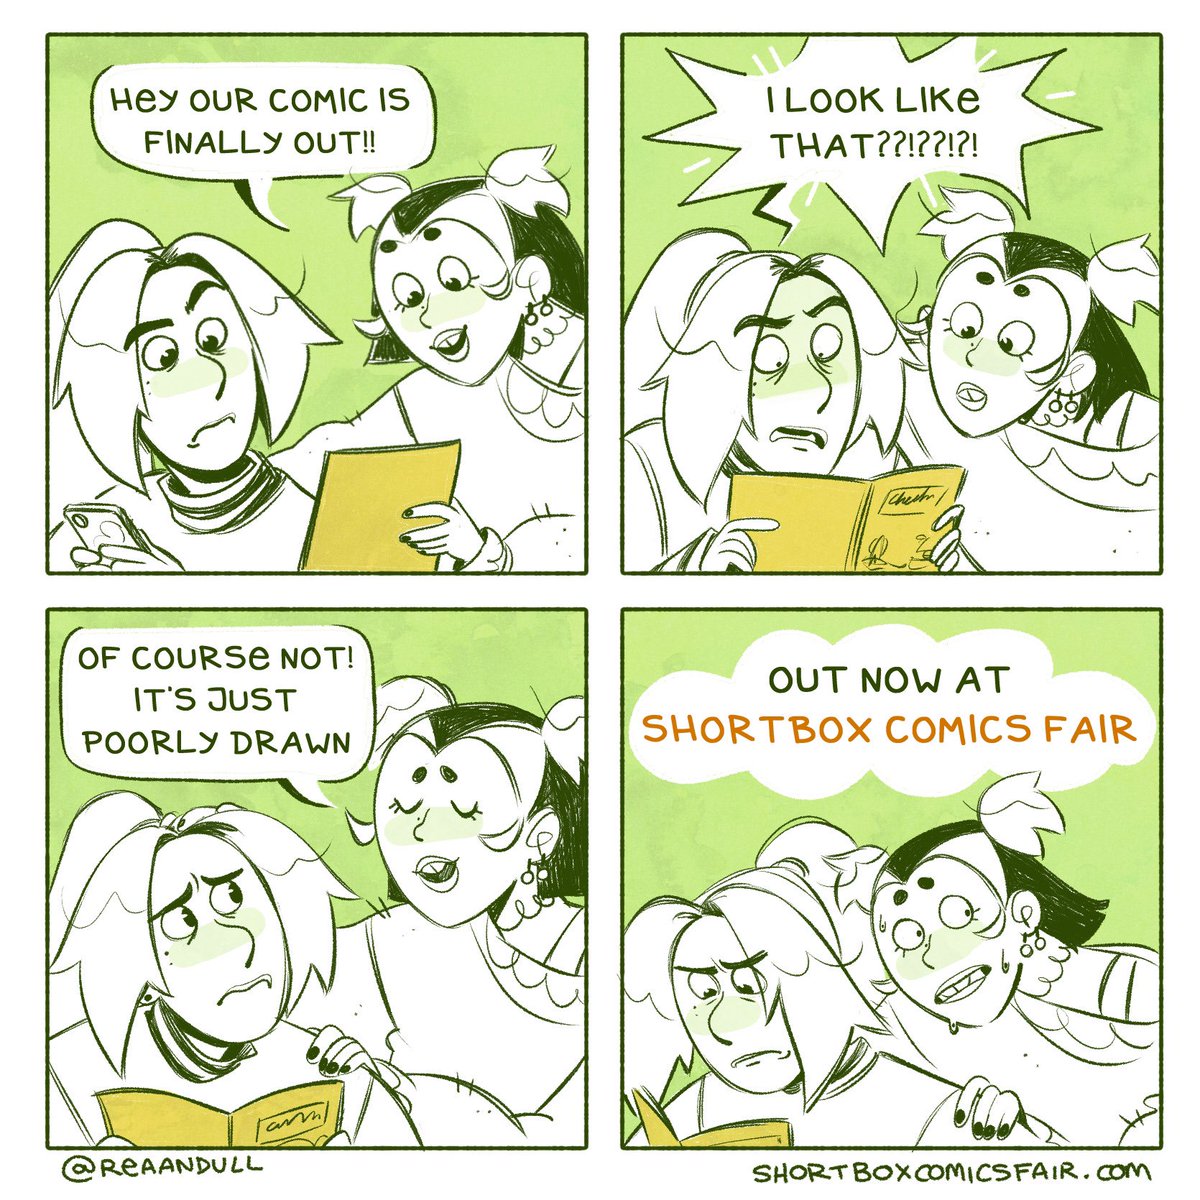 Folks, did you hear that my brand new comic "Cheating (academically)" made for @SBComicsFair is OUT NOW???

📝 Find this story and +100 more at https://t.co/zRCrnWa68u 